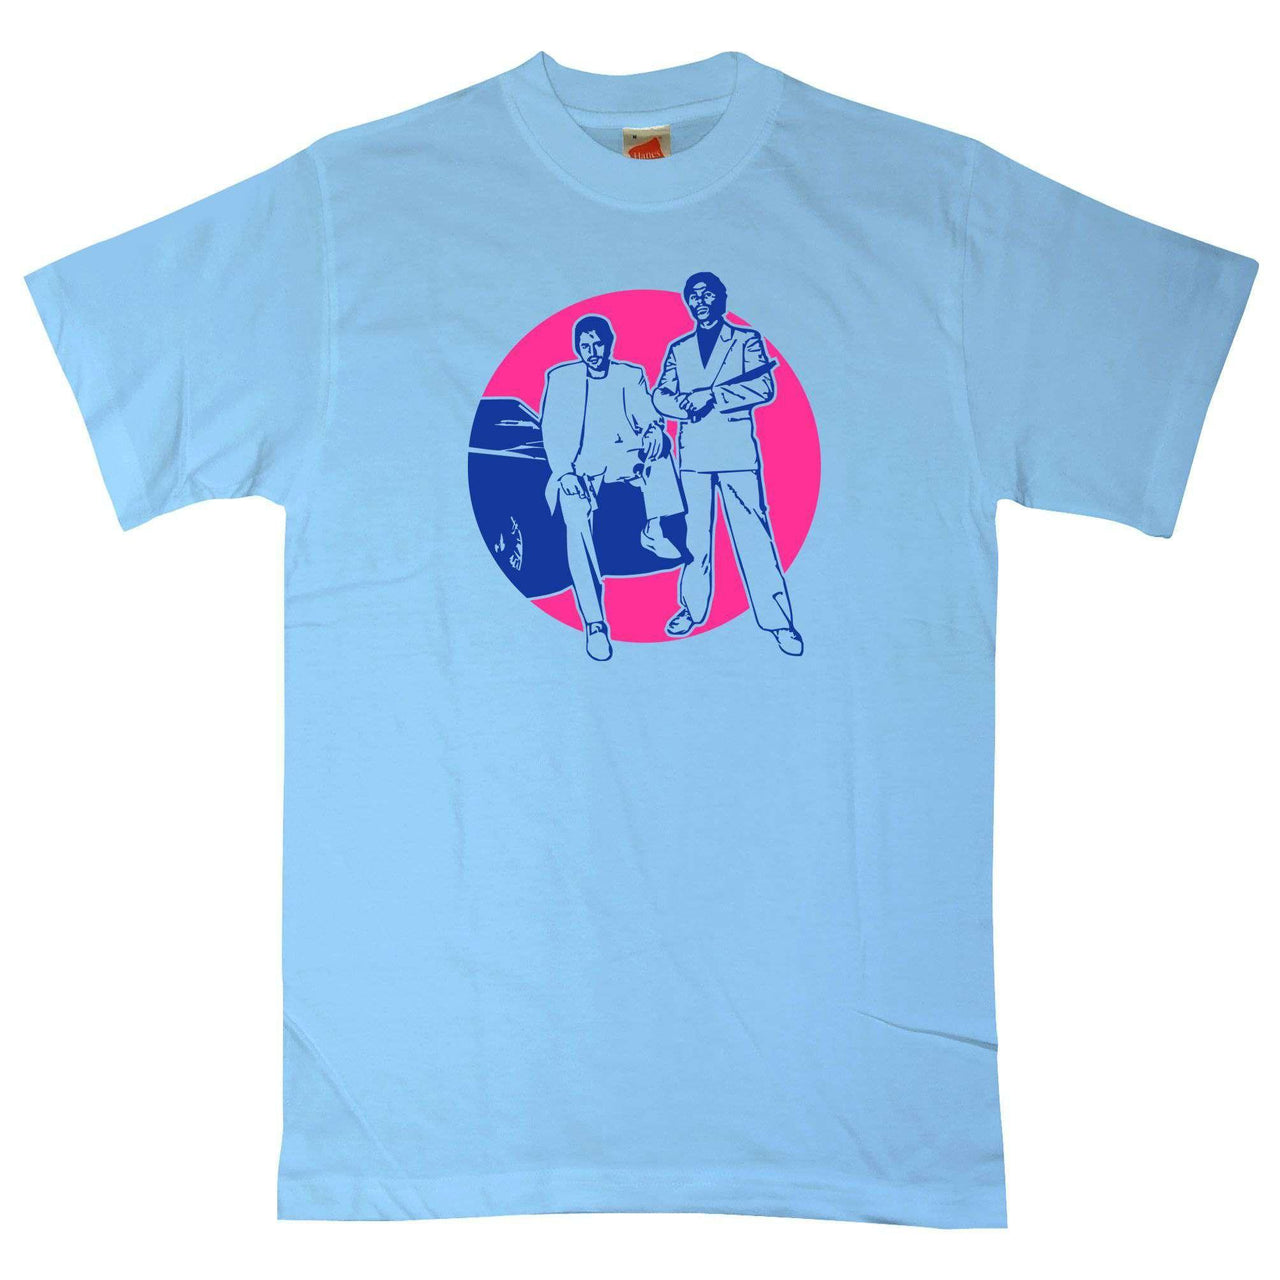 Miami Vice Graphic T-Shirt For Men 8Ball